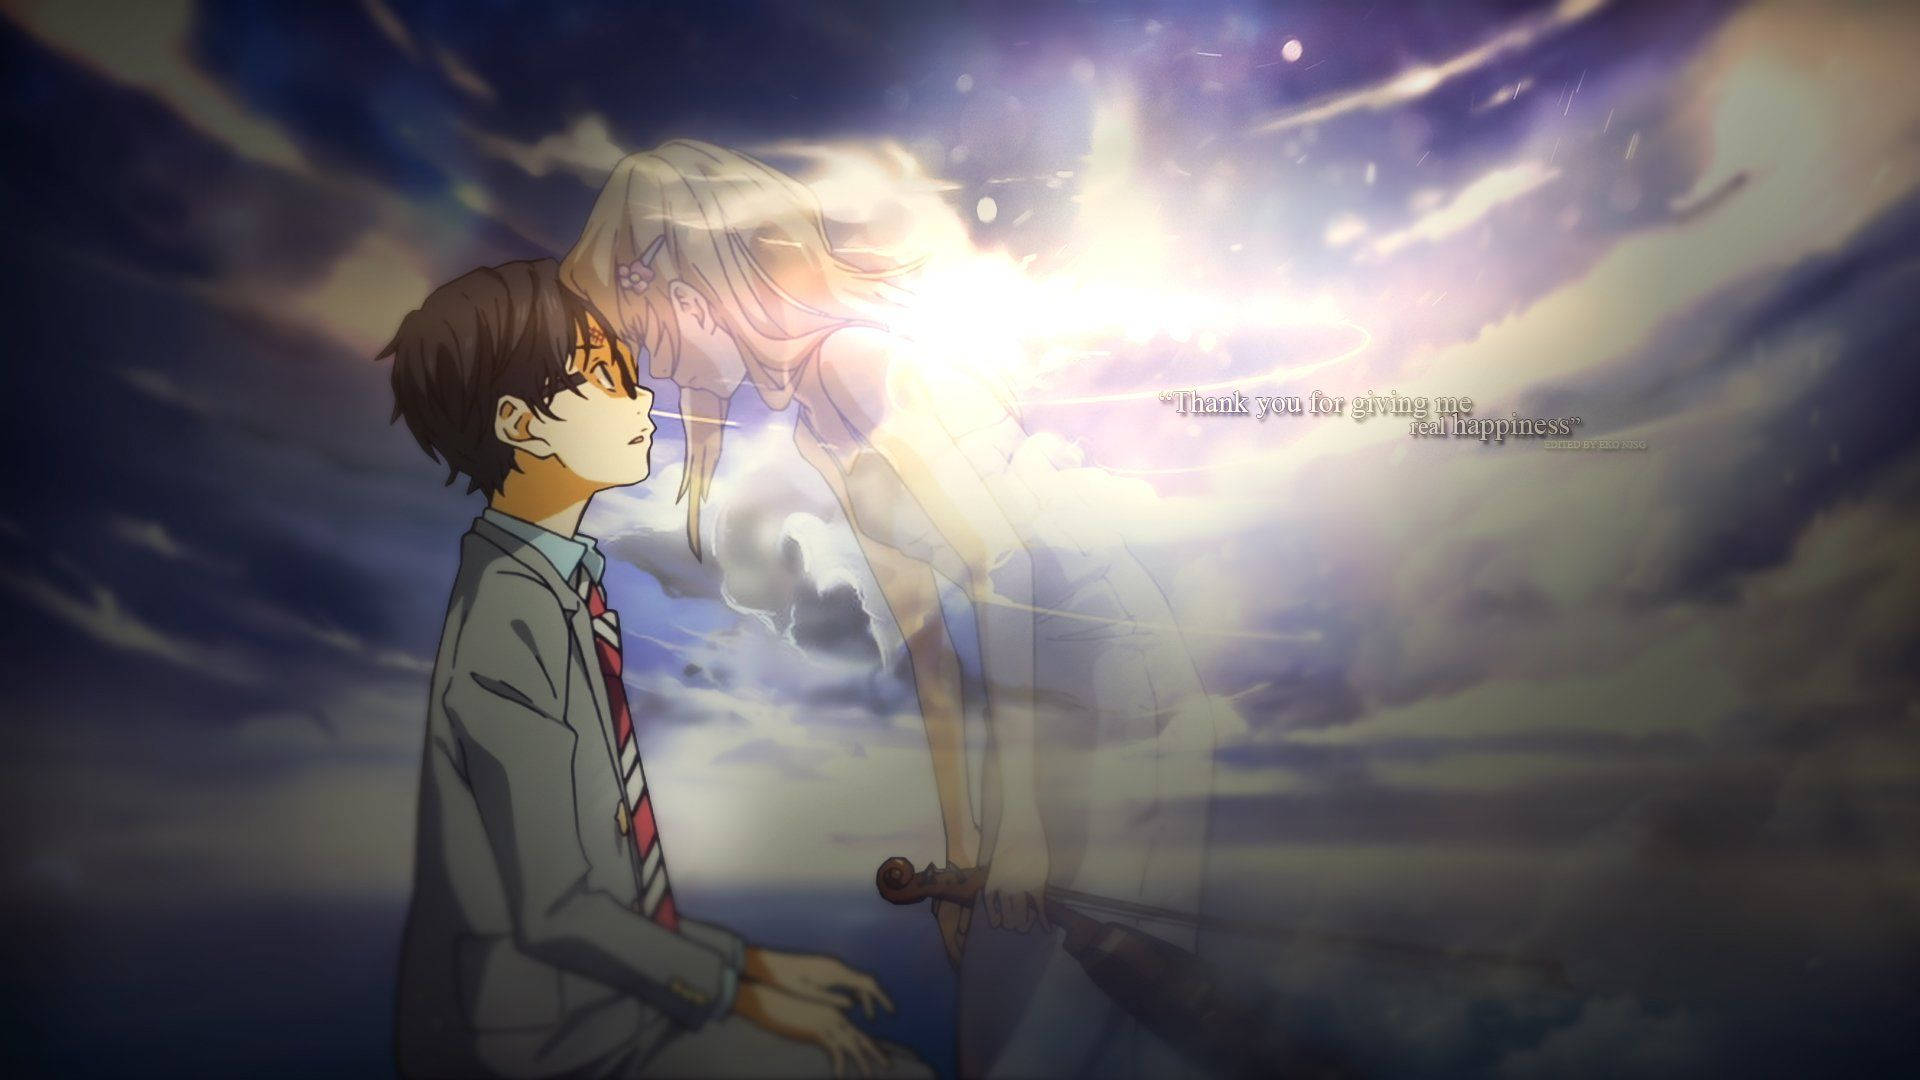 Hd Arima And Kaori Of Your Lie In April Background